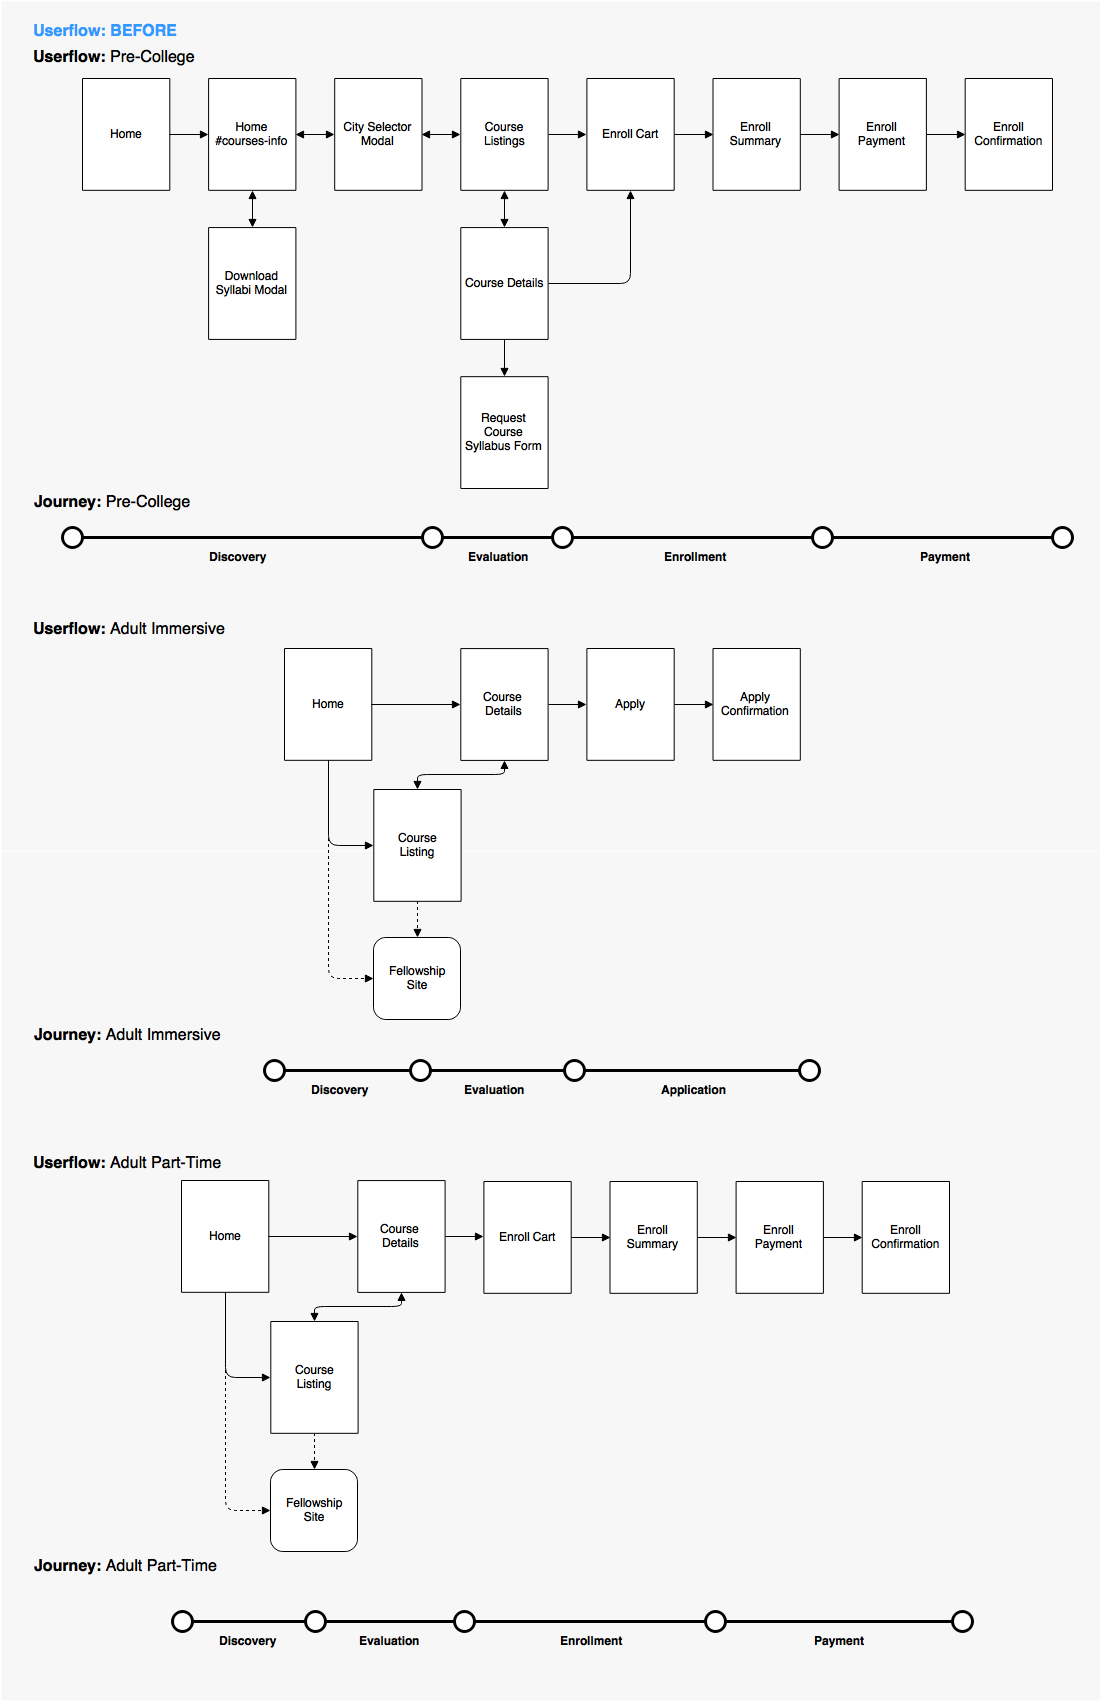 Current State: User Flow | Collaborative Process